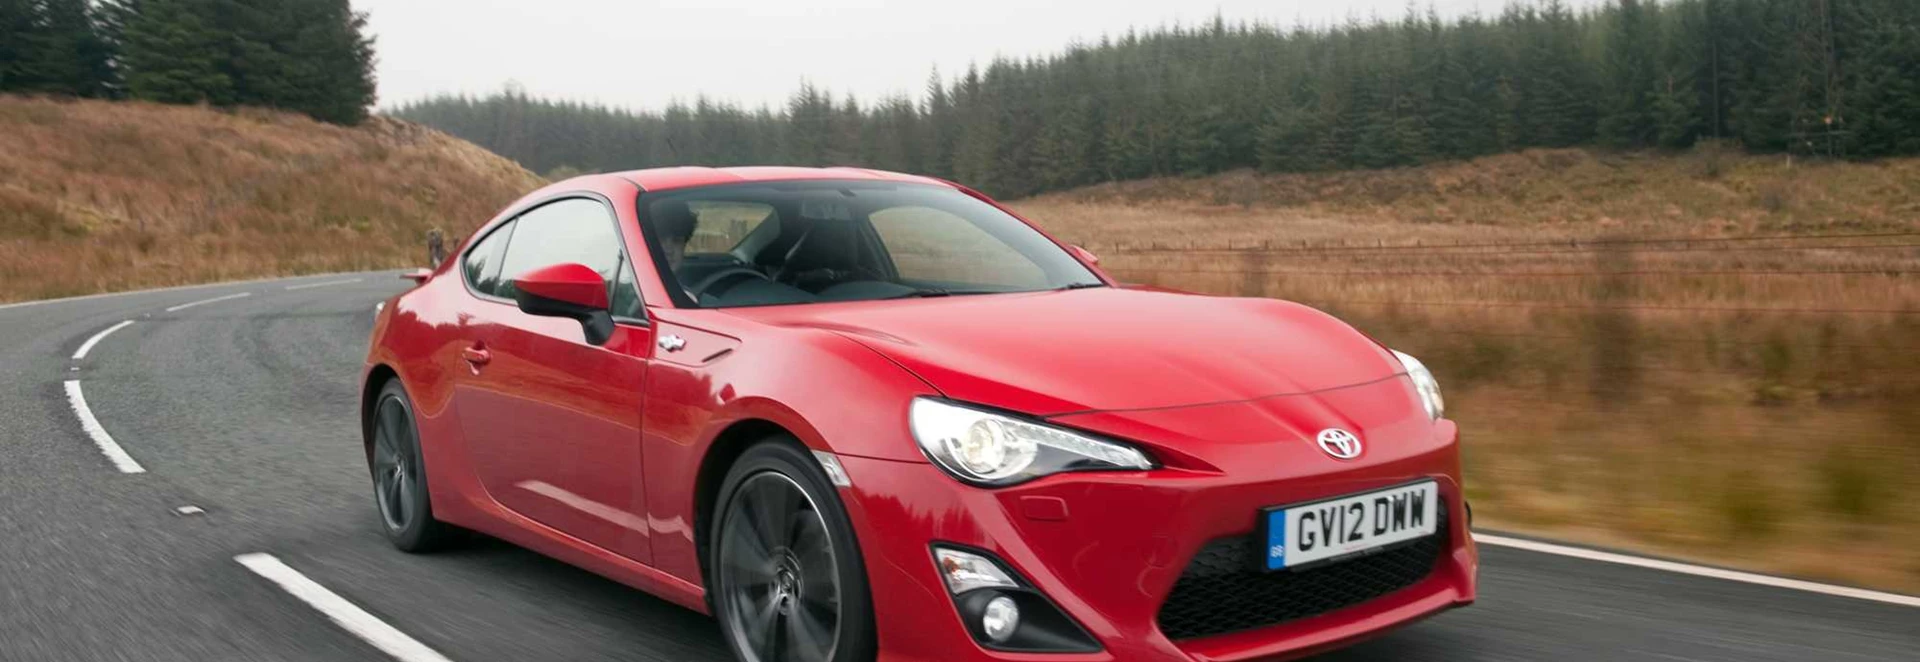 Toyota GT86 coupe review 